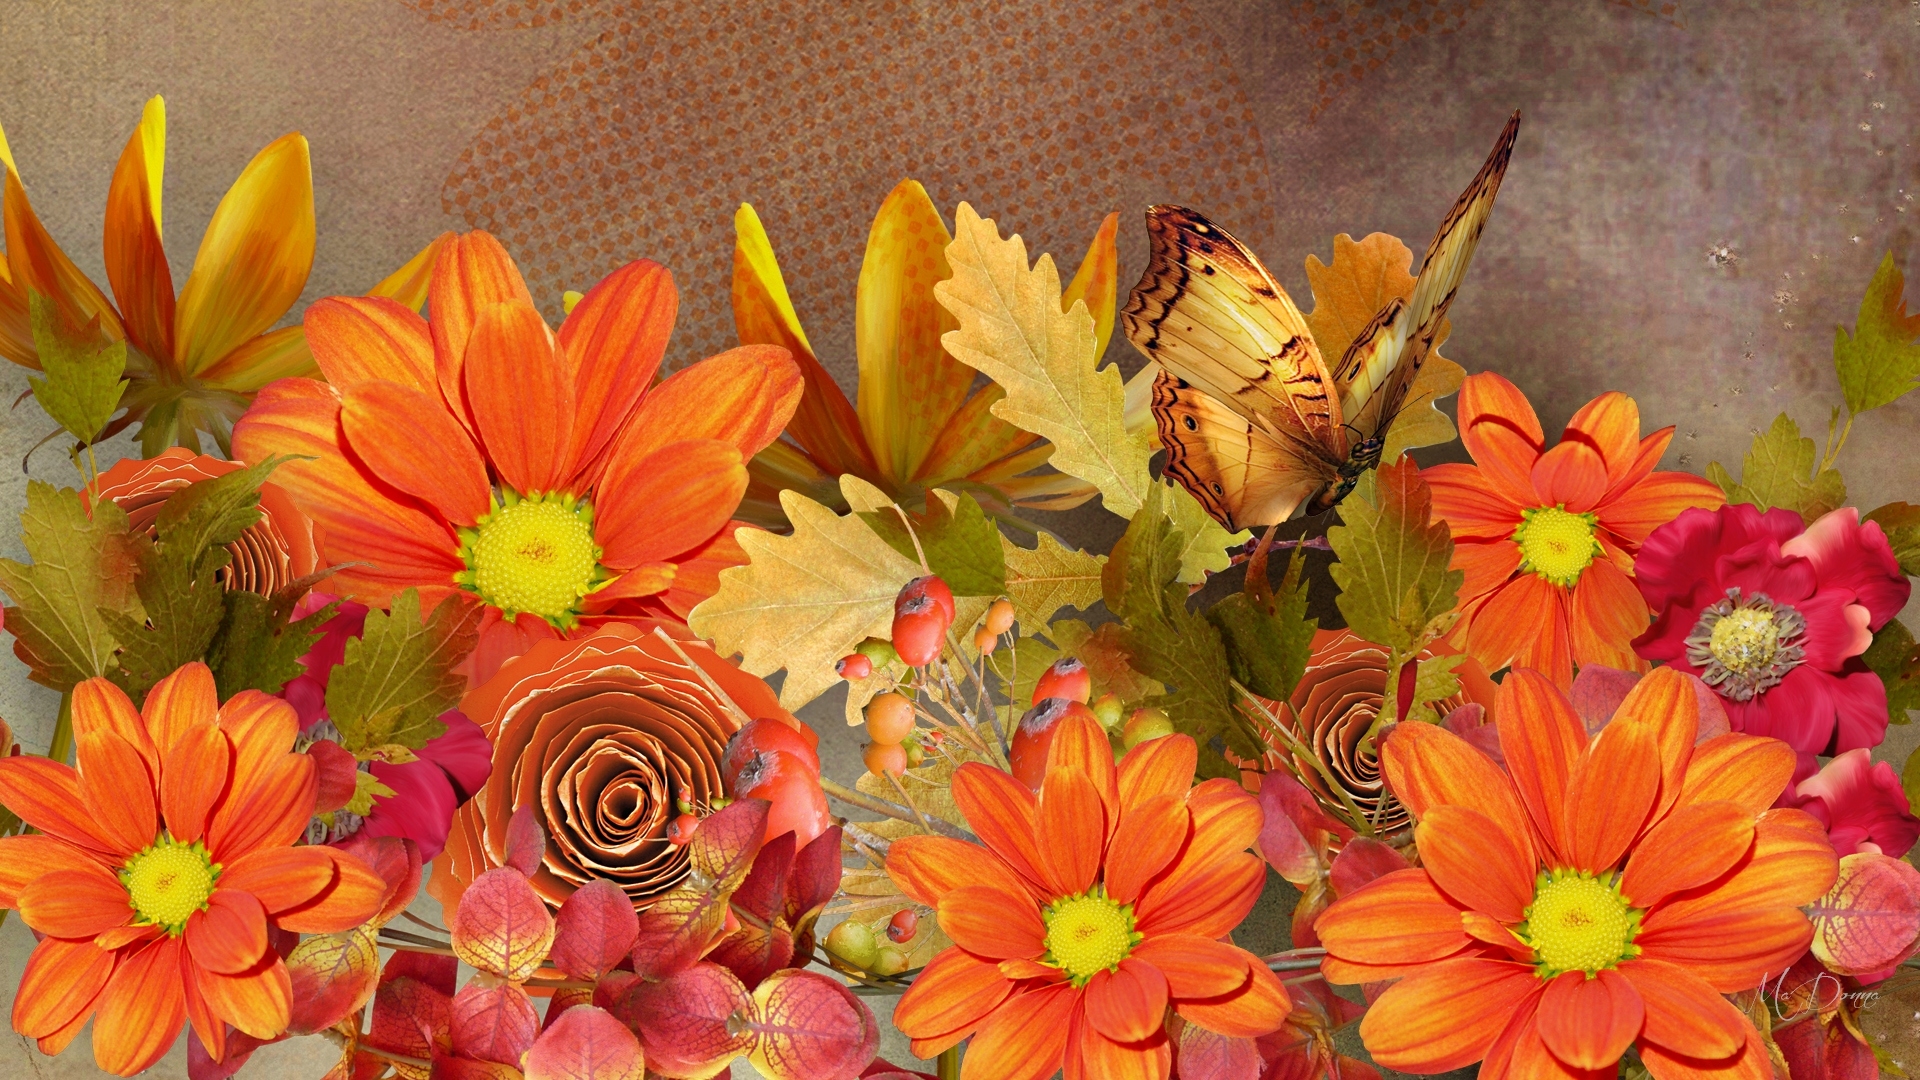 Autumn Flowers and Butterfly by MaDonna